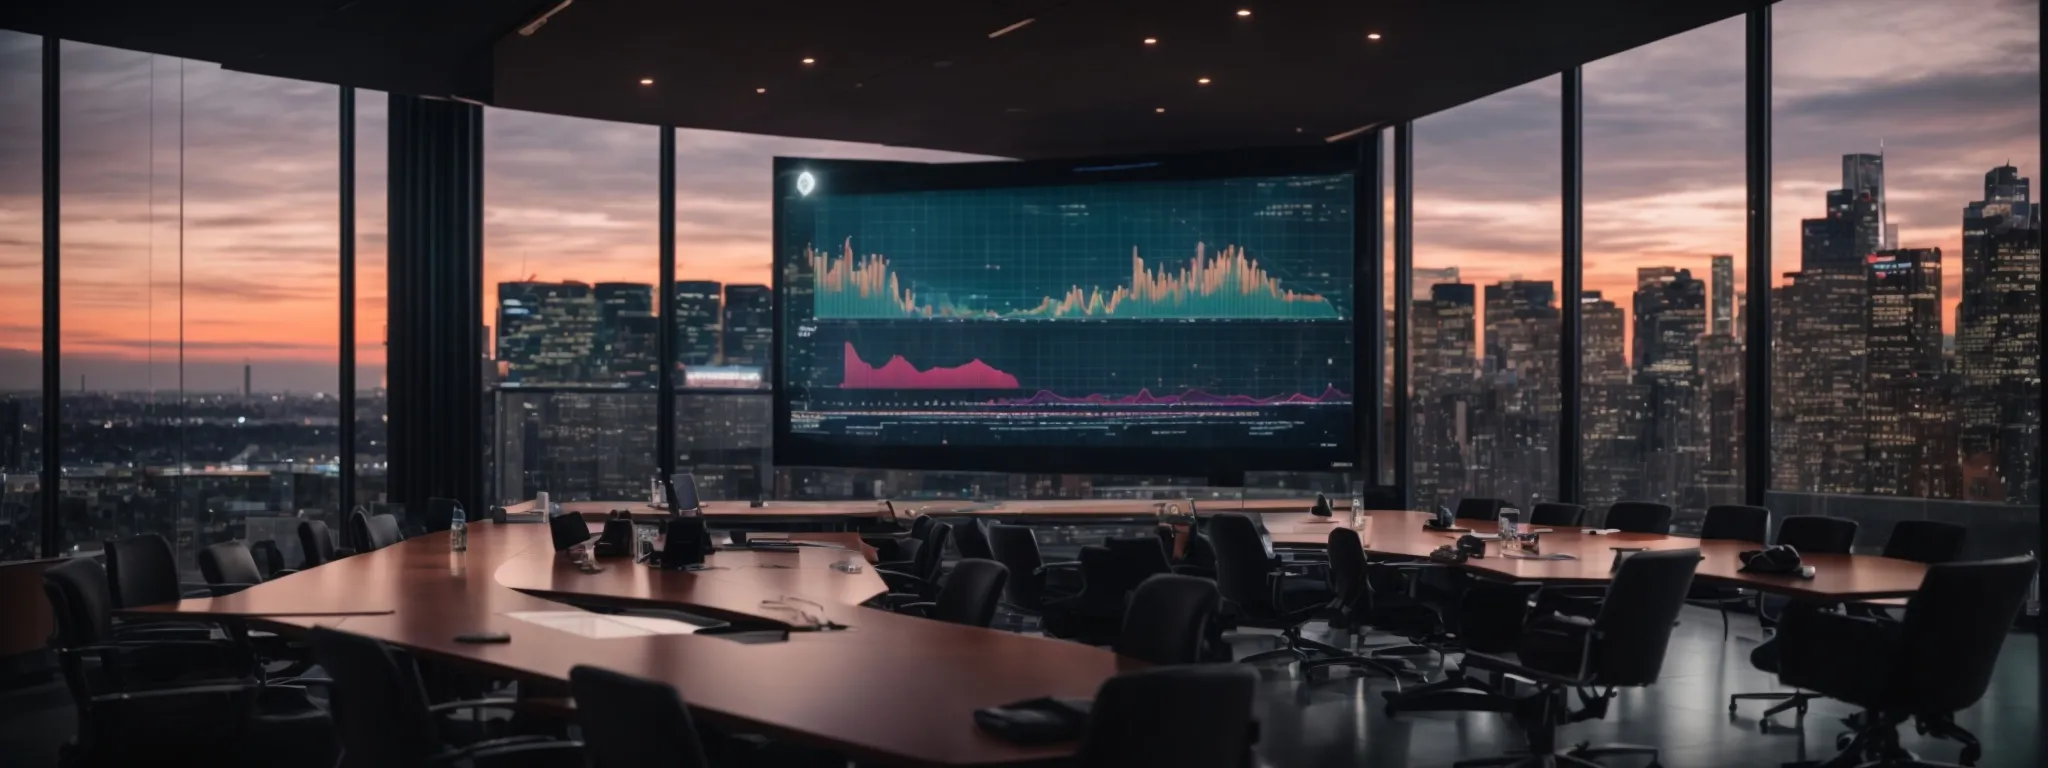 a sleek modern conference room with a large, bright screen displaying colorful graphs and charts next to a city skyline at dusk.